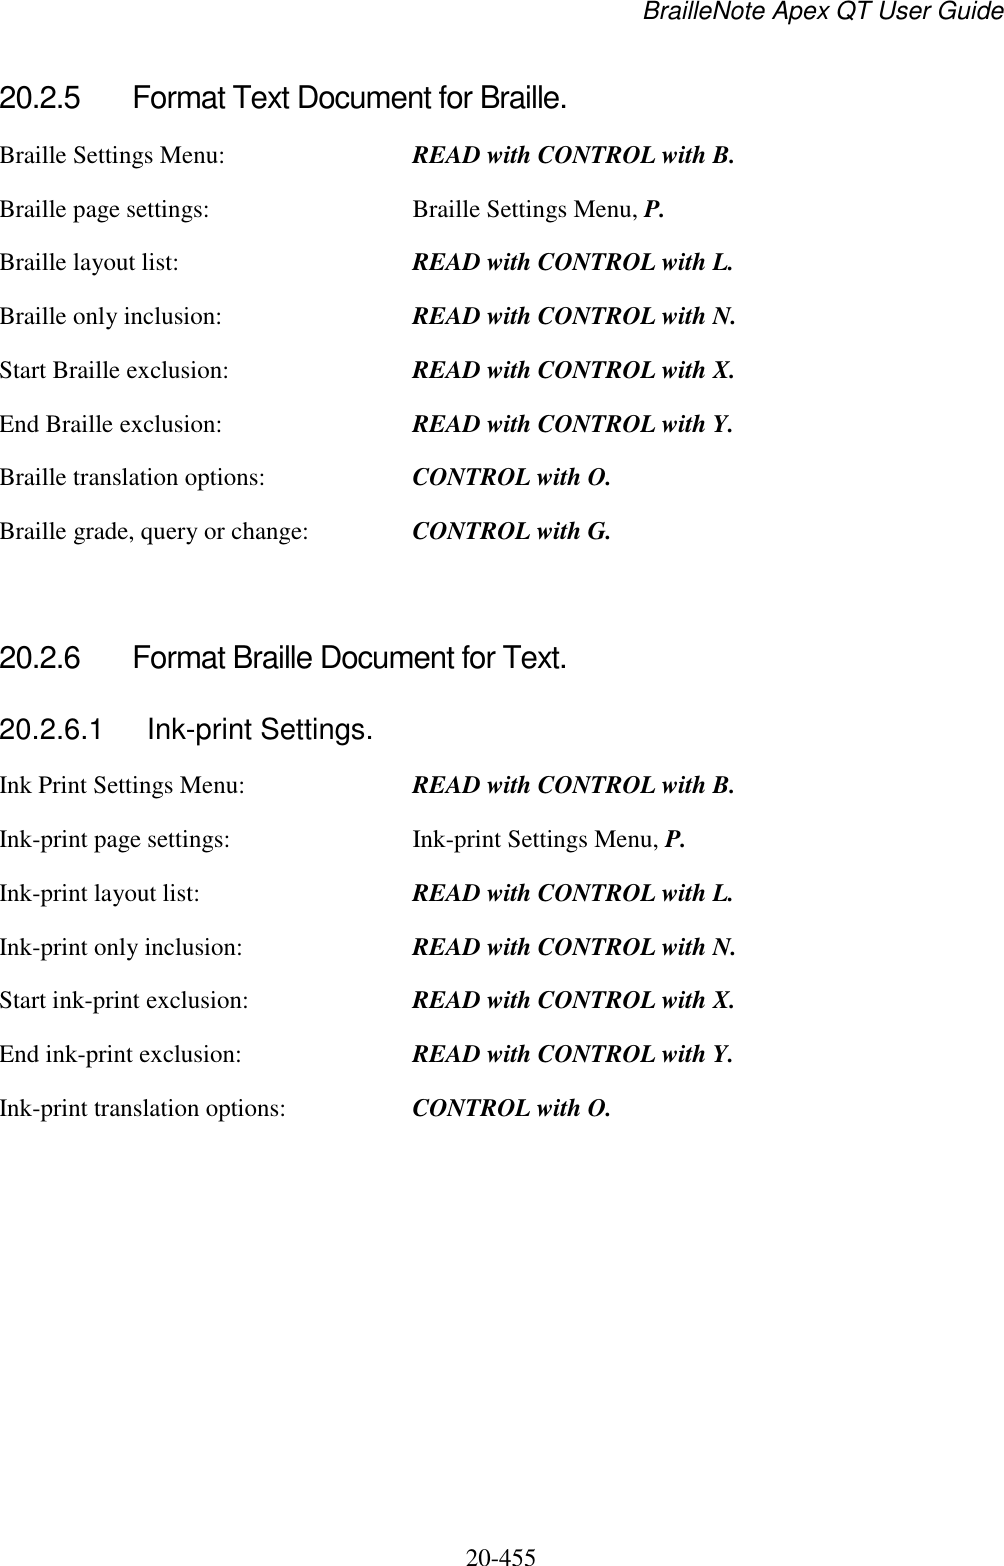 BrailleNote Apex QT User Guide  20-455   20.2.5  Format Text Document for Braille. Braille Settings Menu:  READ with CONTROL with B. Braille page settings:  Braille Settings Menu, P. Braille layout list: READ with CONTROL with L. Braille only inclusion:  READ with CONTROL with N. Start Braille exclusion:  READ with CONTROL with X. End Braille exclusion:  READ with CONTROL with Y. Braille translation options:  CONTROL with O. Braille grade, query or change:  CONTROL with G.   20.2.6  Format Braille Document for Text. 20.2.6.1  Ink-print Settings. Ink Print Settings Menu:  READ with CONTROL with B. Ink-print page settings:  Ink-print Settings Menu, P. Ink-print layout list:  READ with CONTROL with L. Ink-print only inclusion:  READ with CONTROL with N. Start ink-print exclusion:  READ with CONTROL with X. End ink-print exclusion:  READ with CONTROL with Y. Ink-print translation options:  CONTROL with O.   